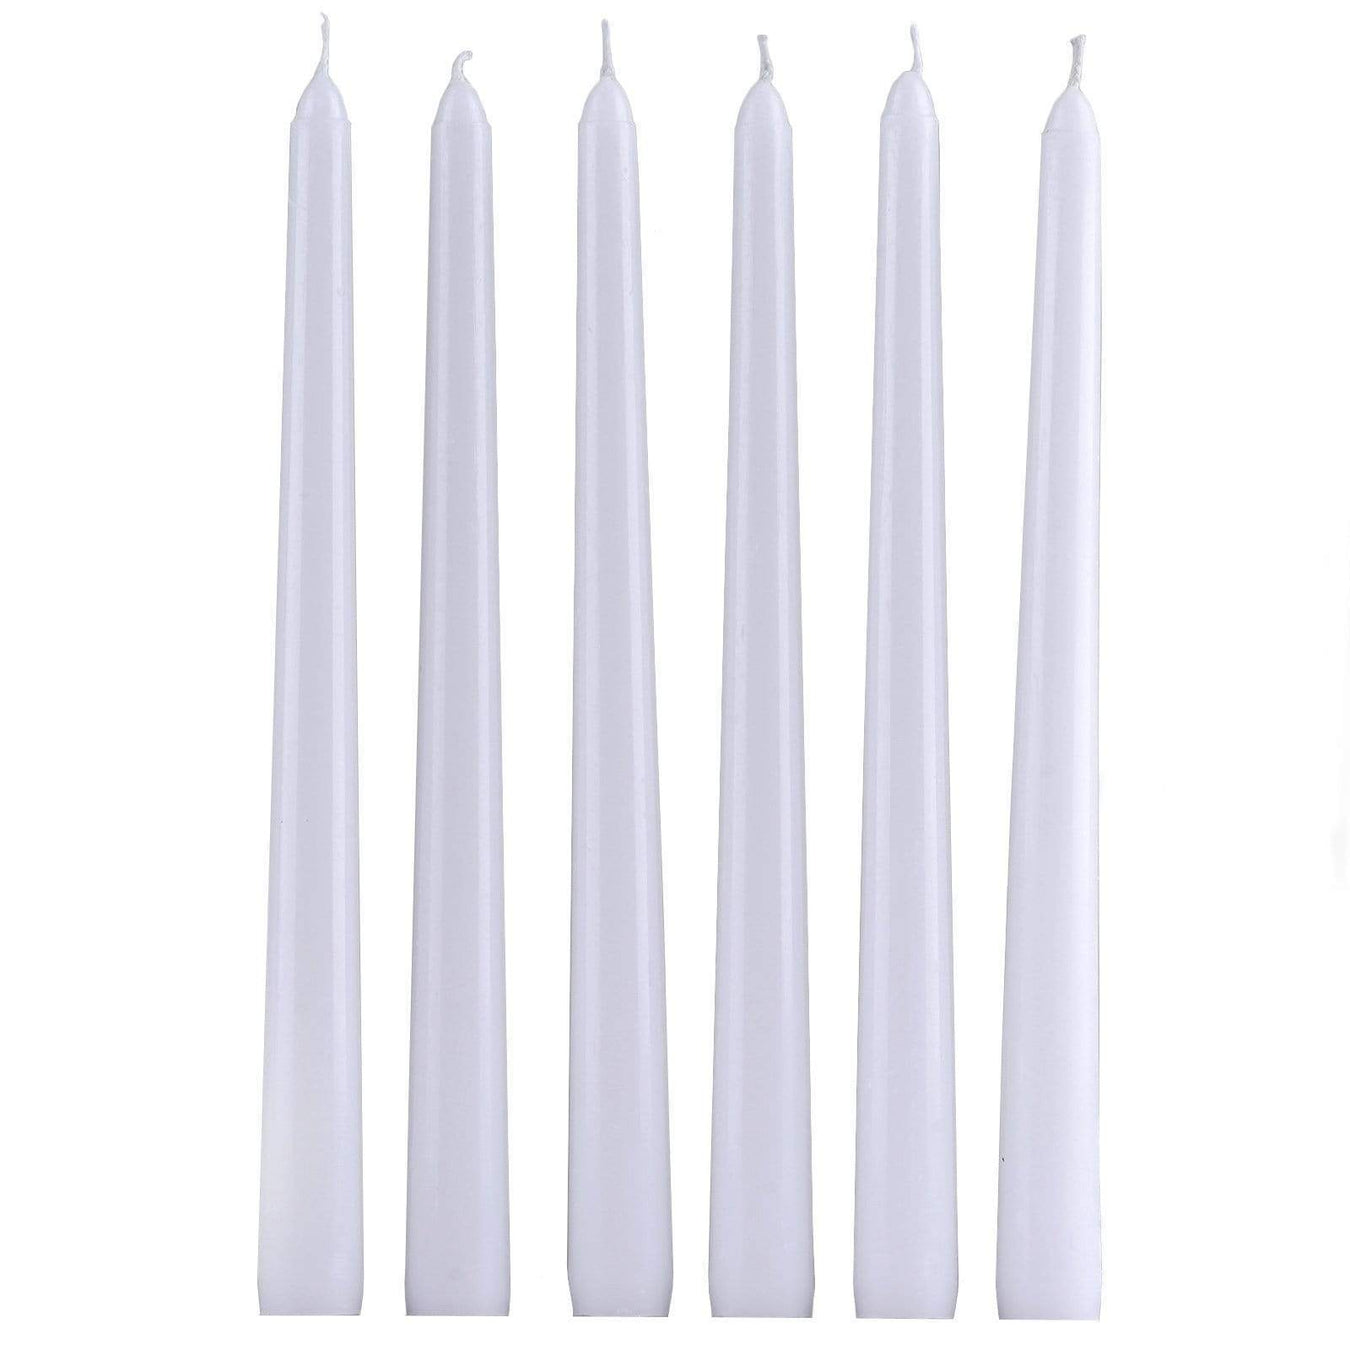 12 pcs 10 inches tall Premium Taper Candles Centerpieces